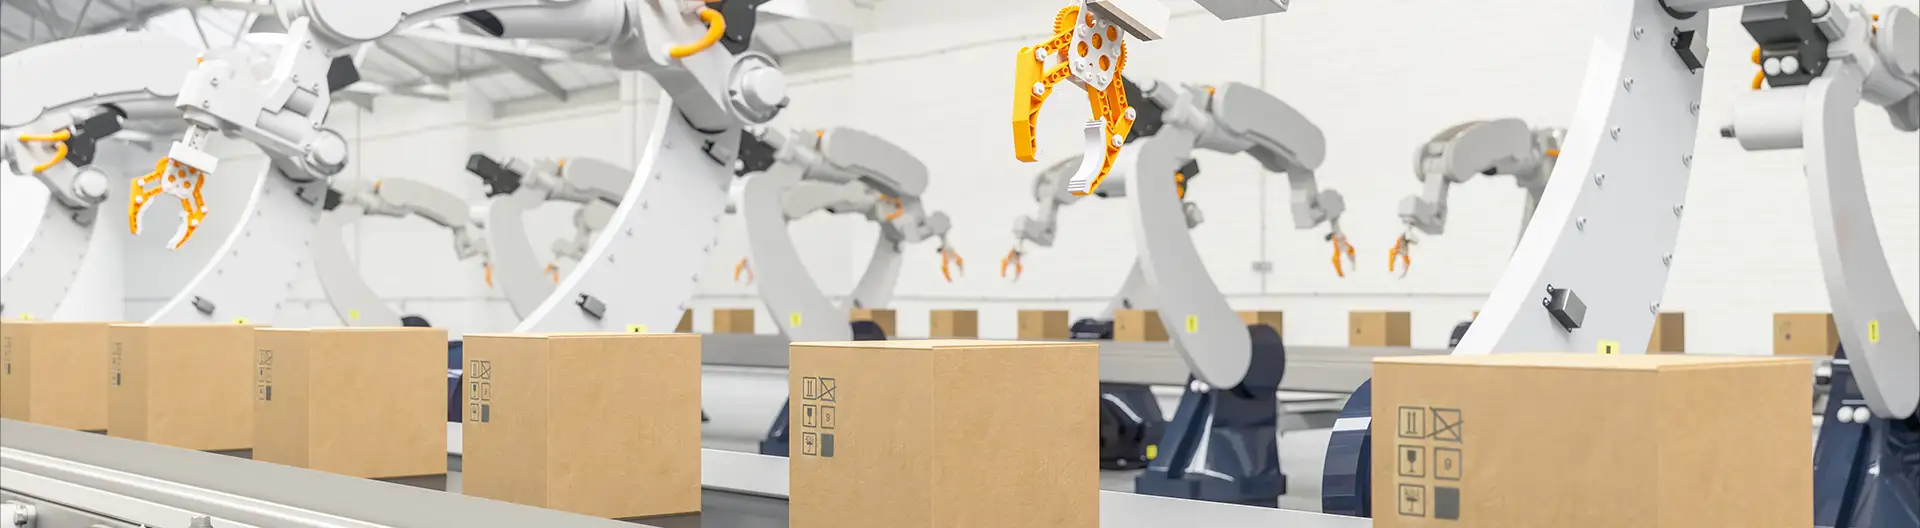 Transforming Warehousing and Supply Chain Management with IoT and Robotics - Banner